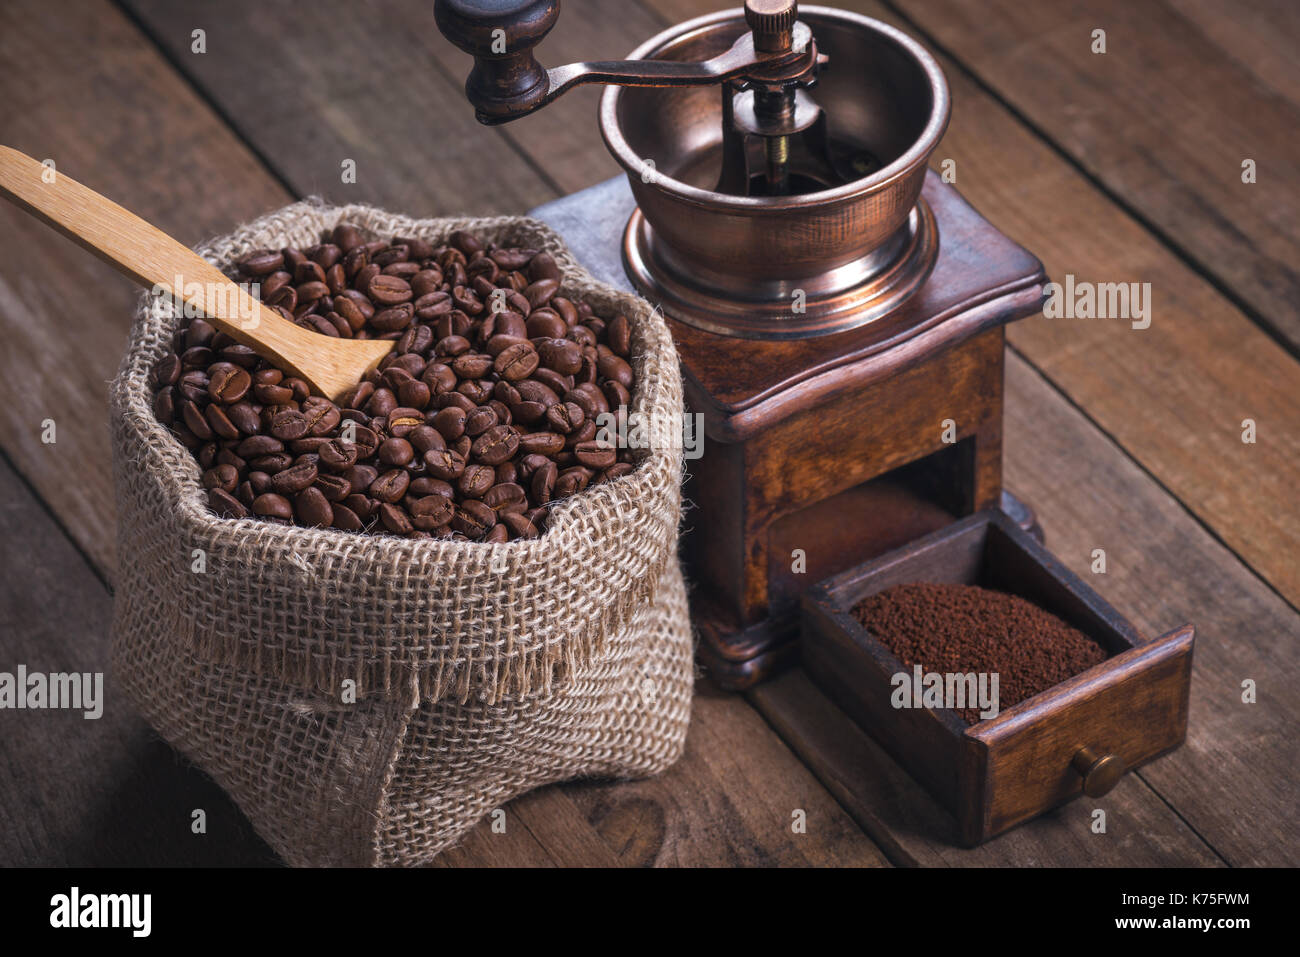 Grinding coffee from roasted beans into a rustic bag. Stock Photo